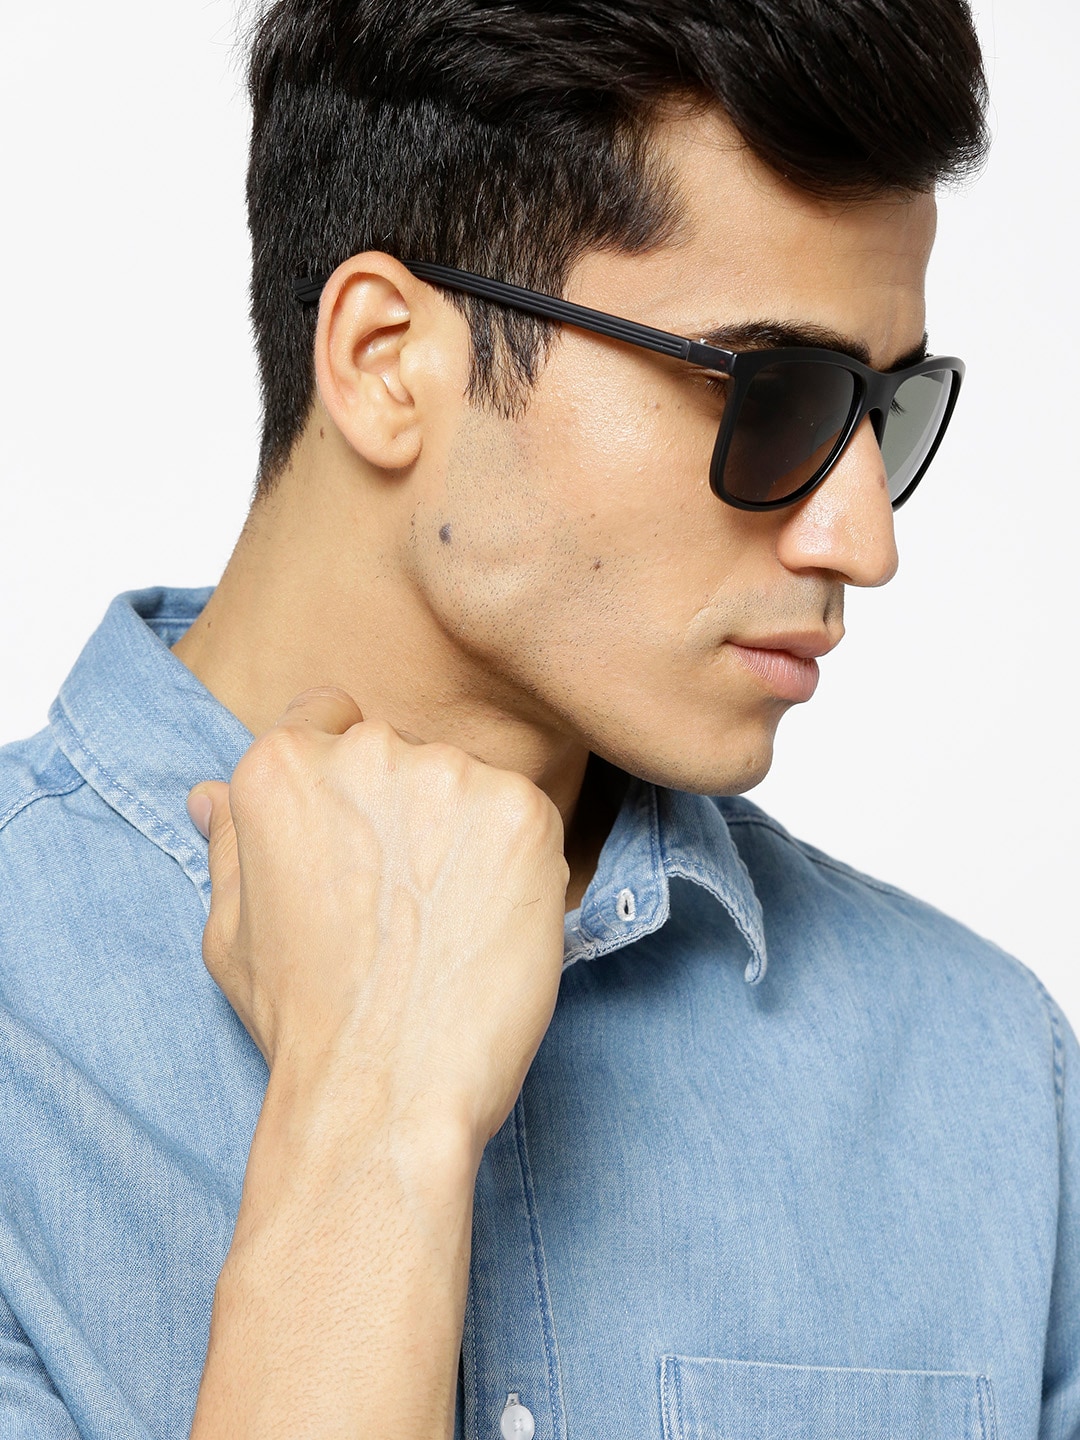 Roadster Unisex Square Sunglasses MFB-PN-PS-A4804 Price in India